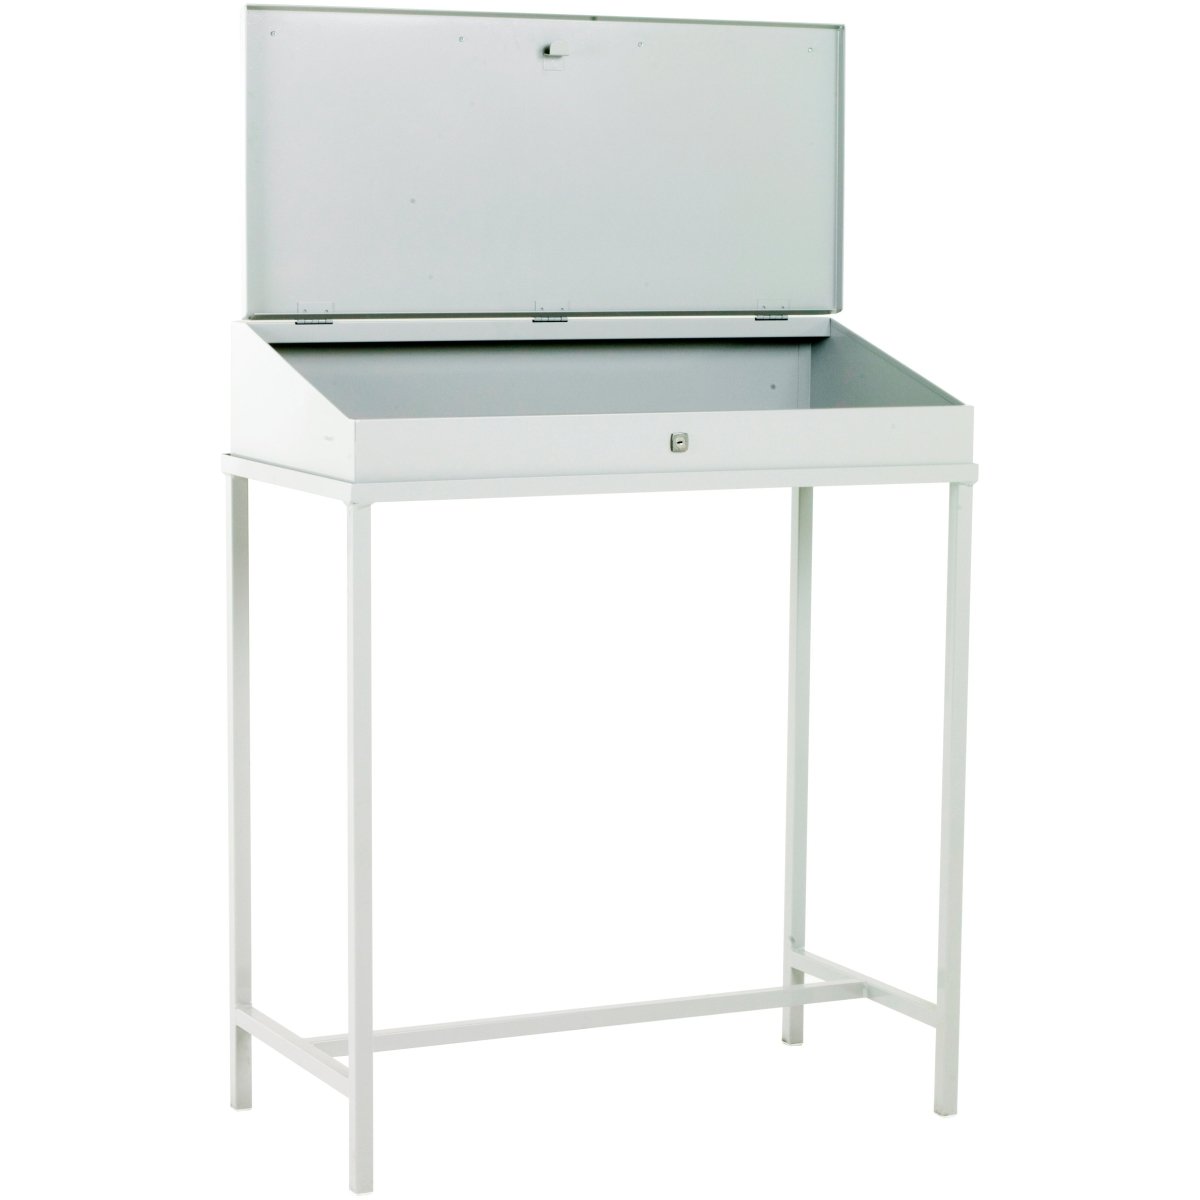 Workdesk On Static Frame Base - Warehouse Storage Products